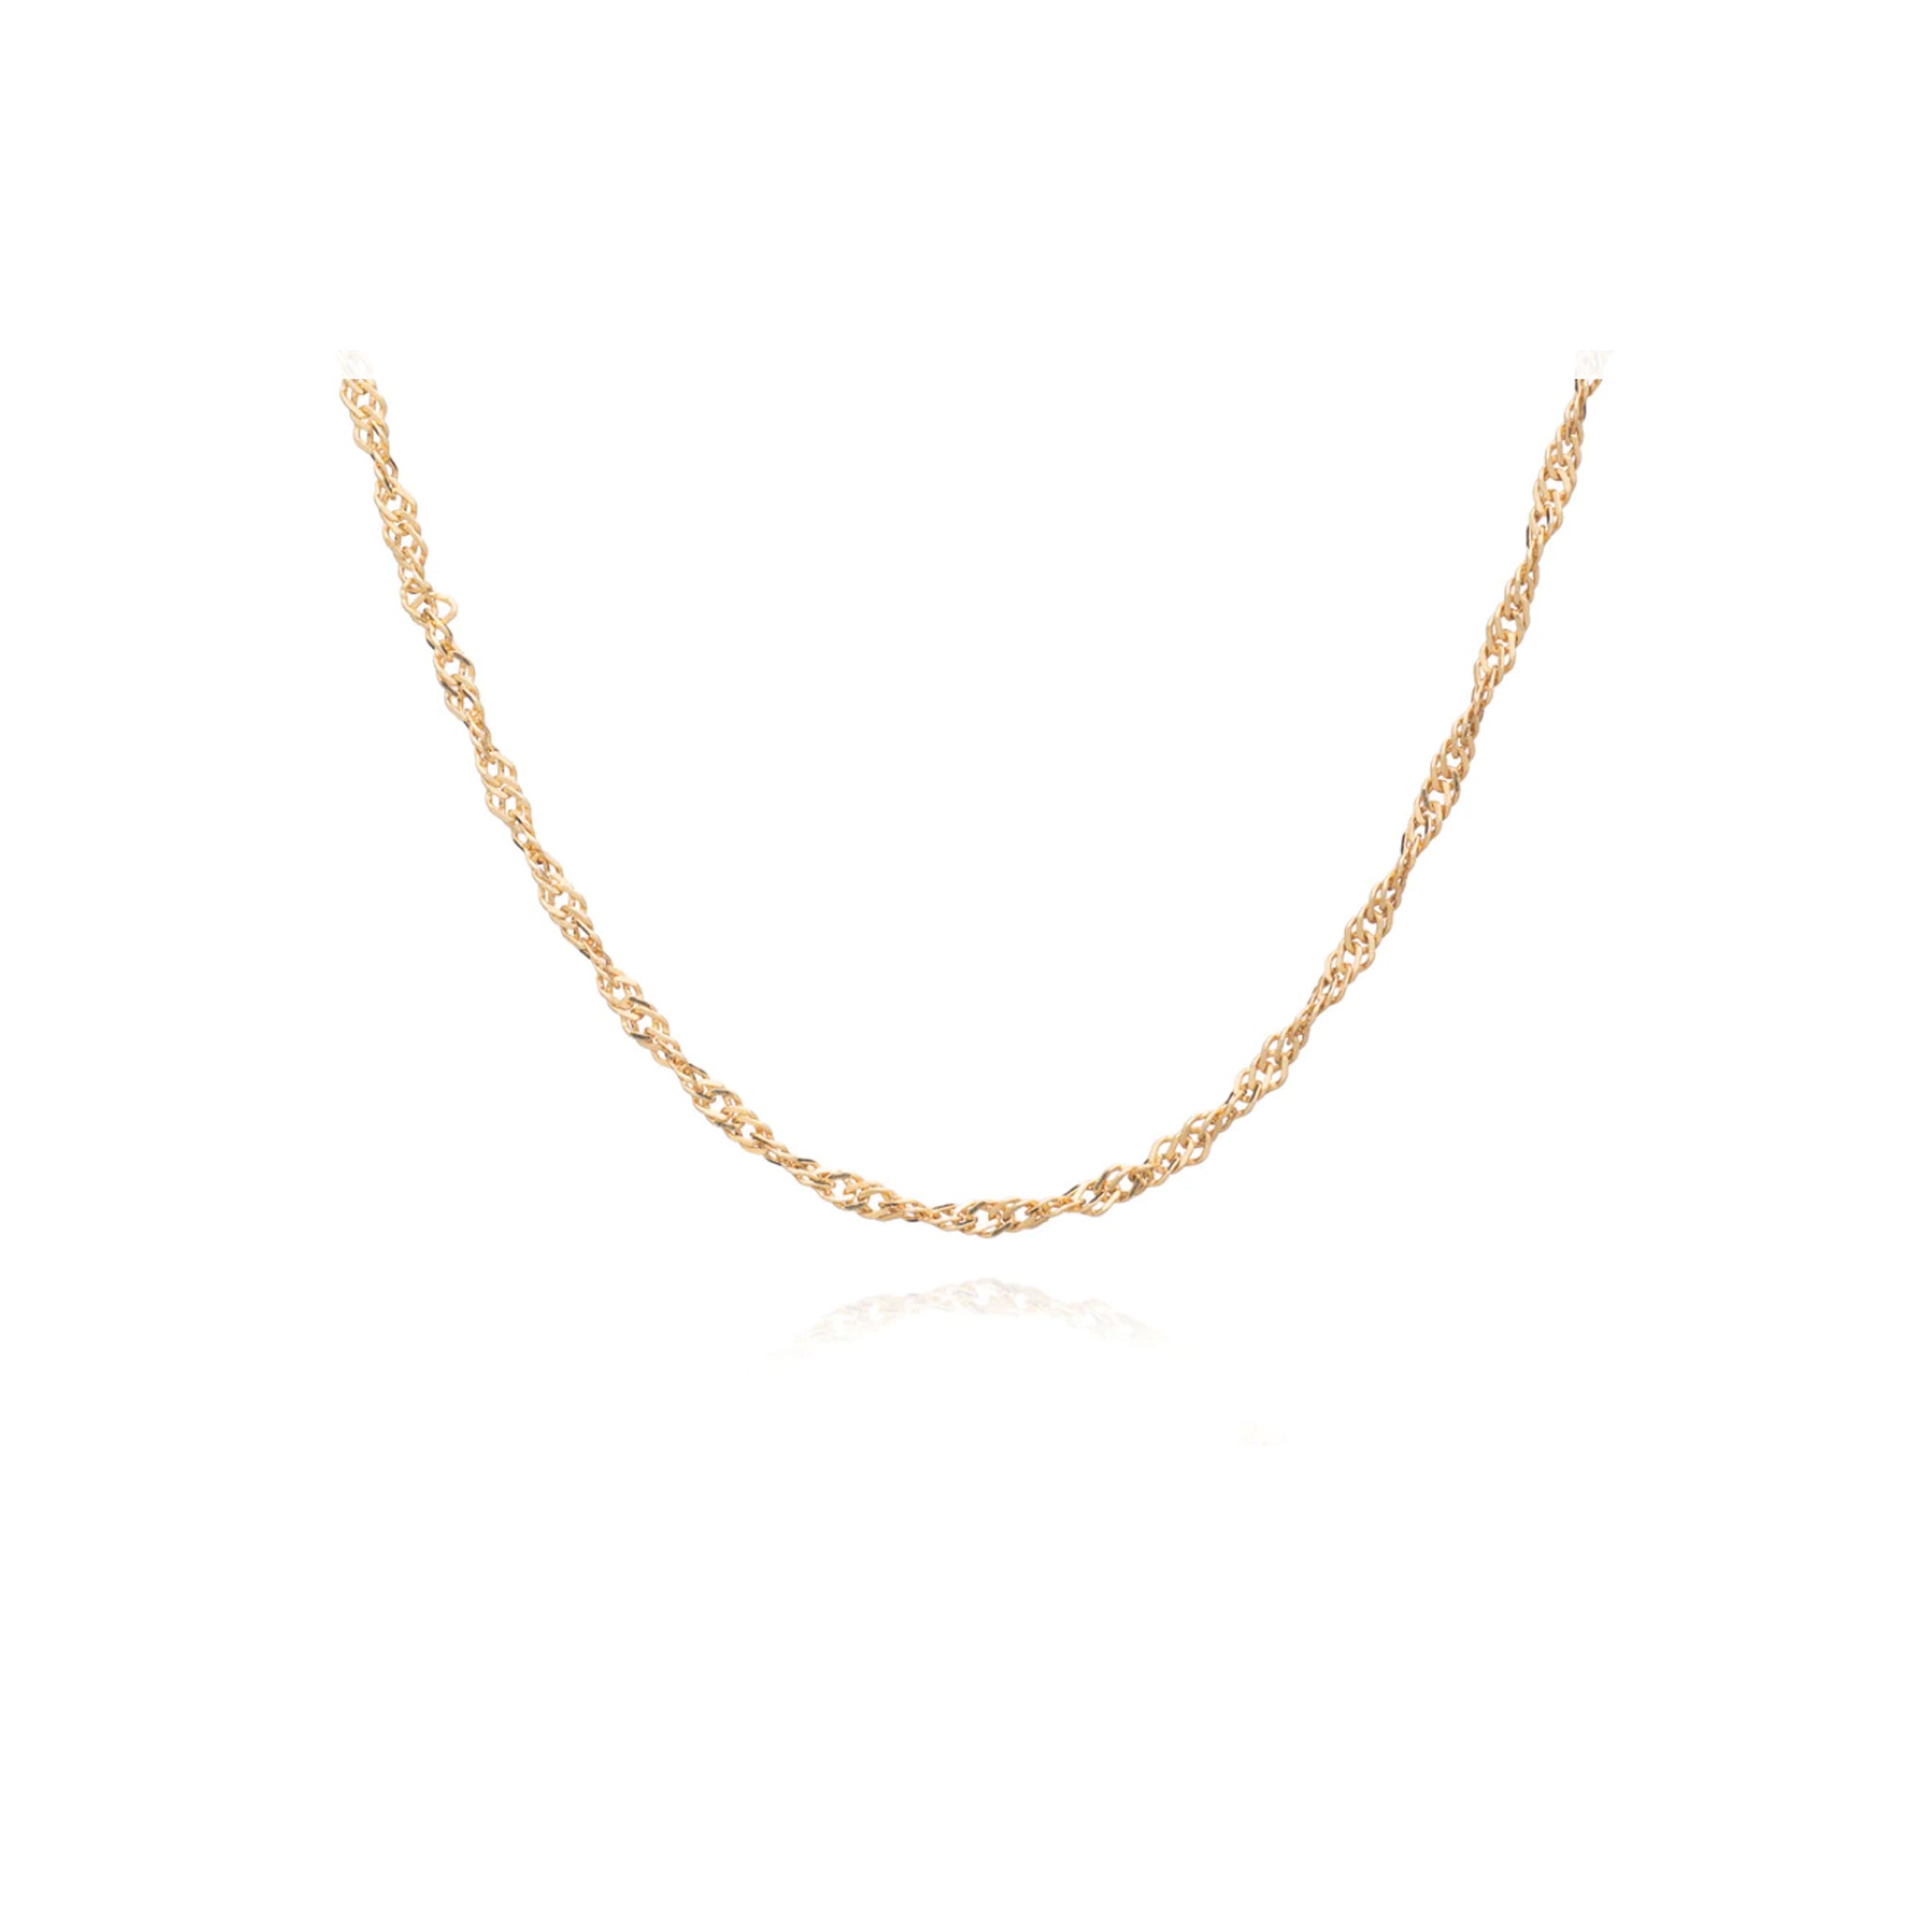 A Mid-length Twist Chain Necklace - Gold by Rachel Jackson London, perfect for layering, on a white background.